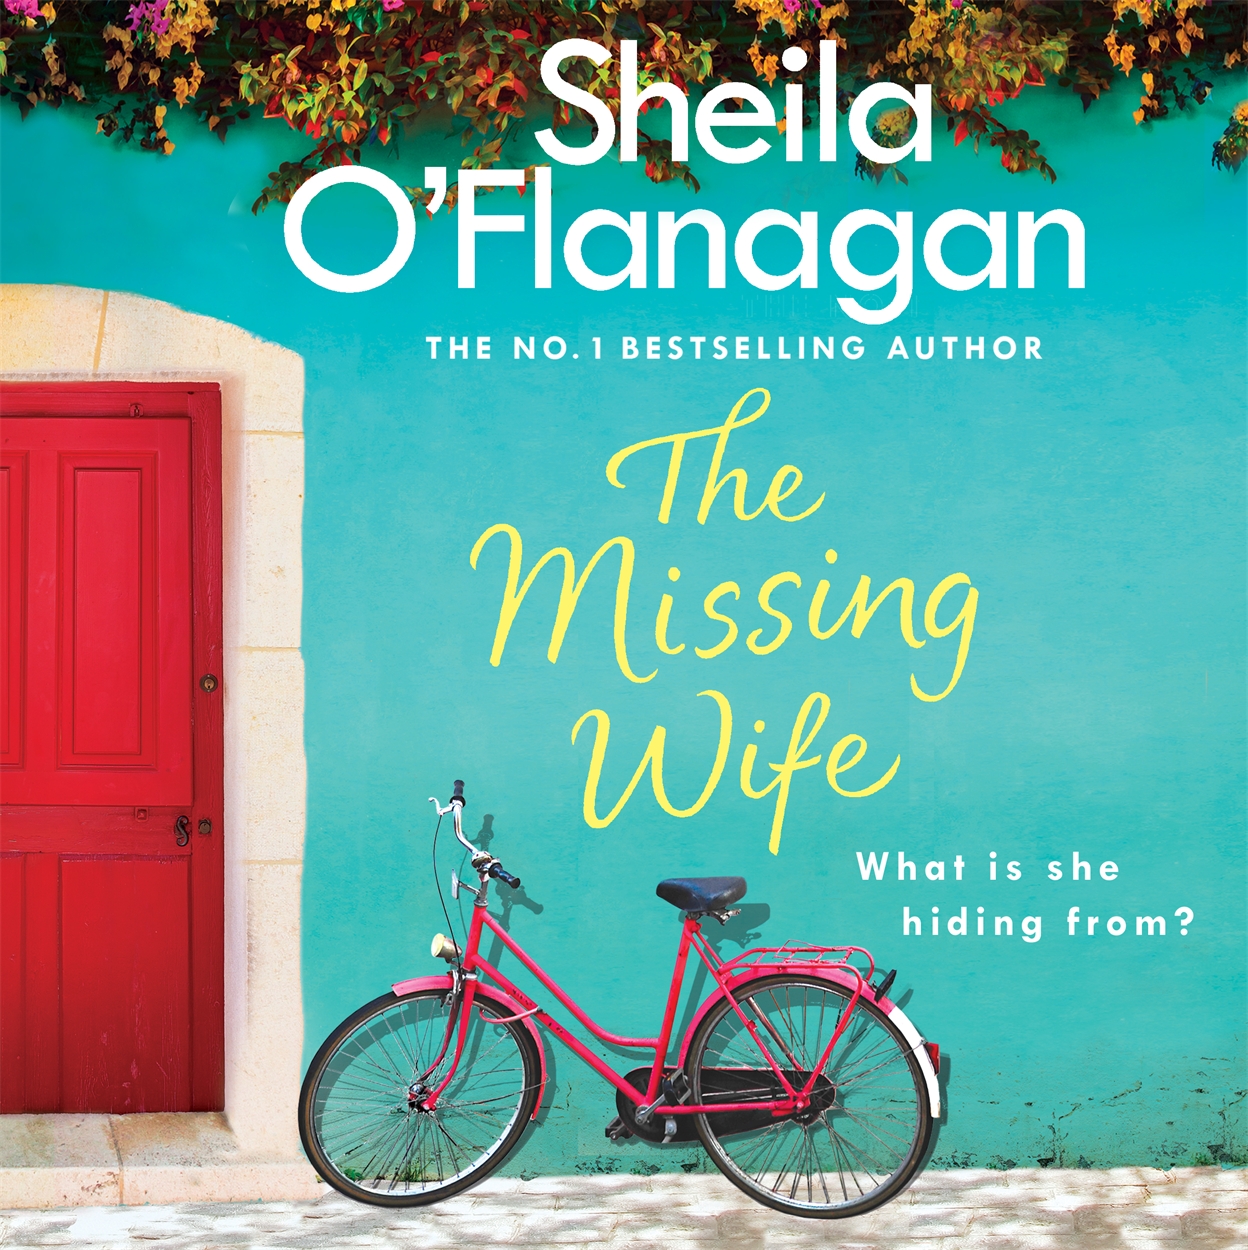 the-missing-wife-the-uplifting-and-compelling-smash-hit-bestseller-by-sheila-o-flanagan